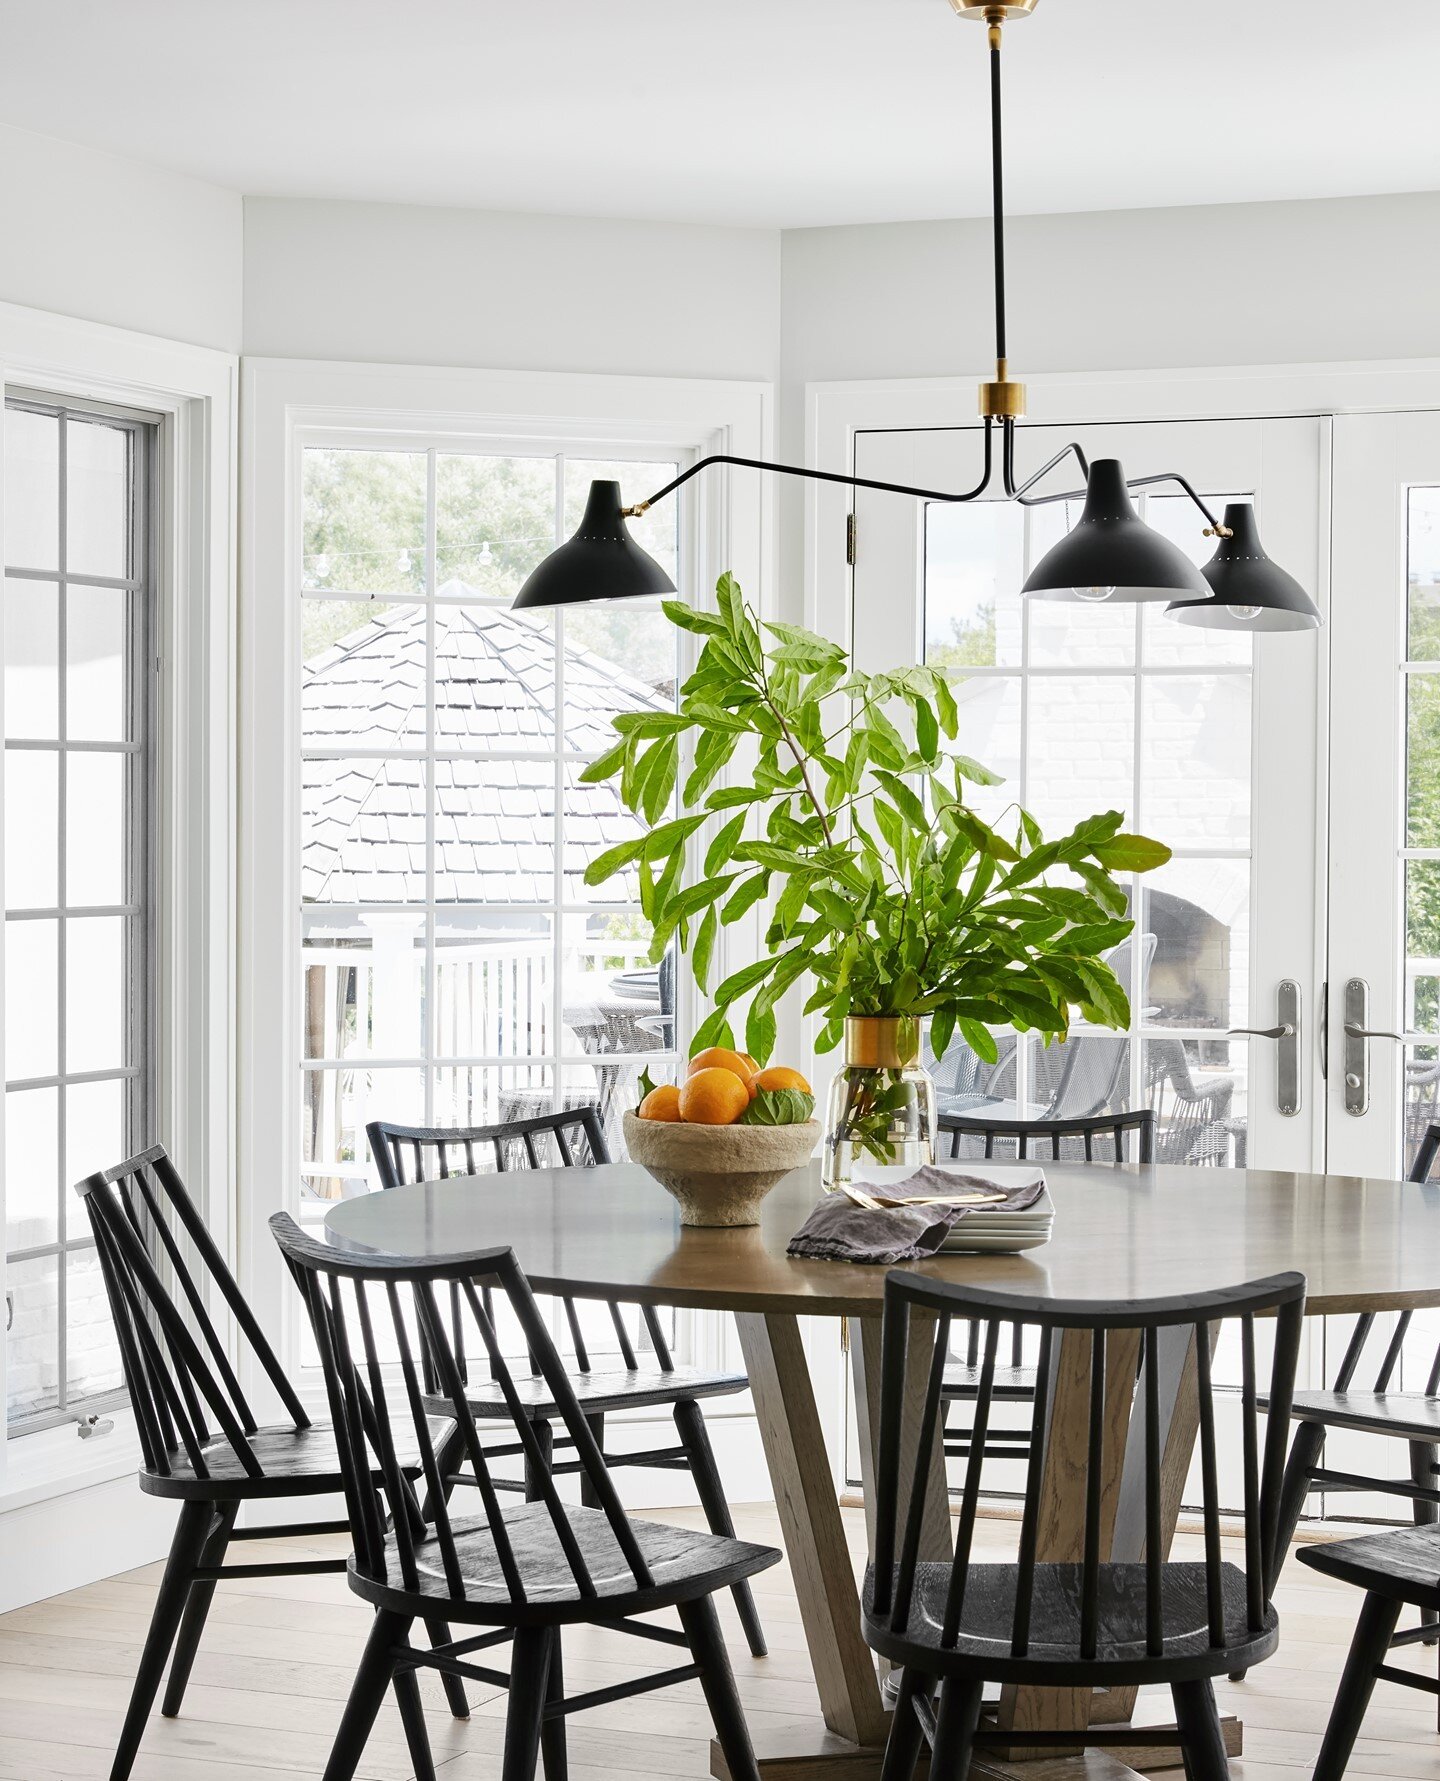 The oversized chandelier creates drama and draws attention to this light-filled breakfast nook. The sculptural feel of the fixture adds an artistic vibe. ⁠
.⁠
.⁠
.⁠
.⁠
⁠
#VHInteriorsTOW #interiordesign #homedecor #homedecorideas #designinspo #designt